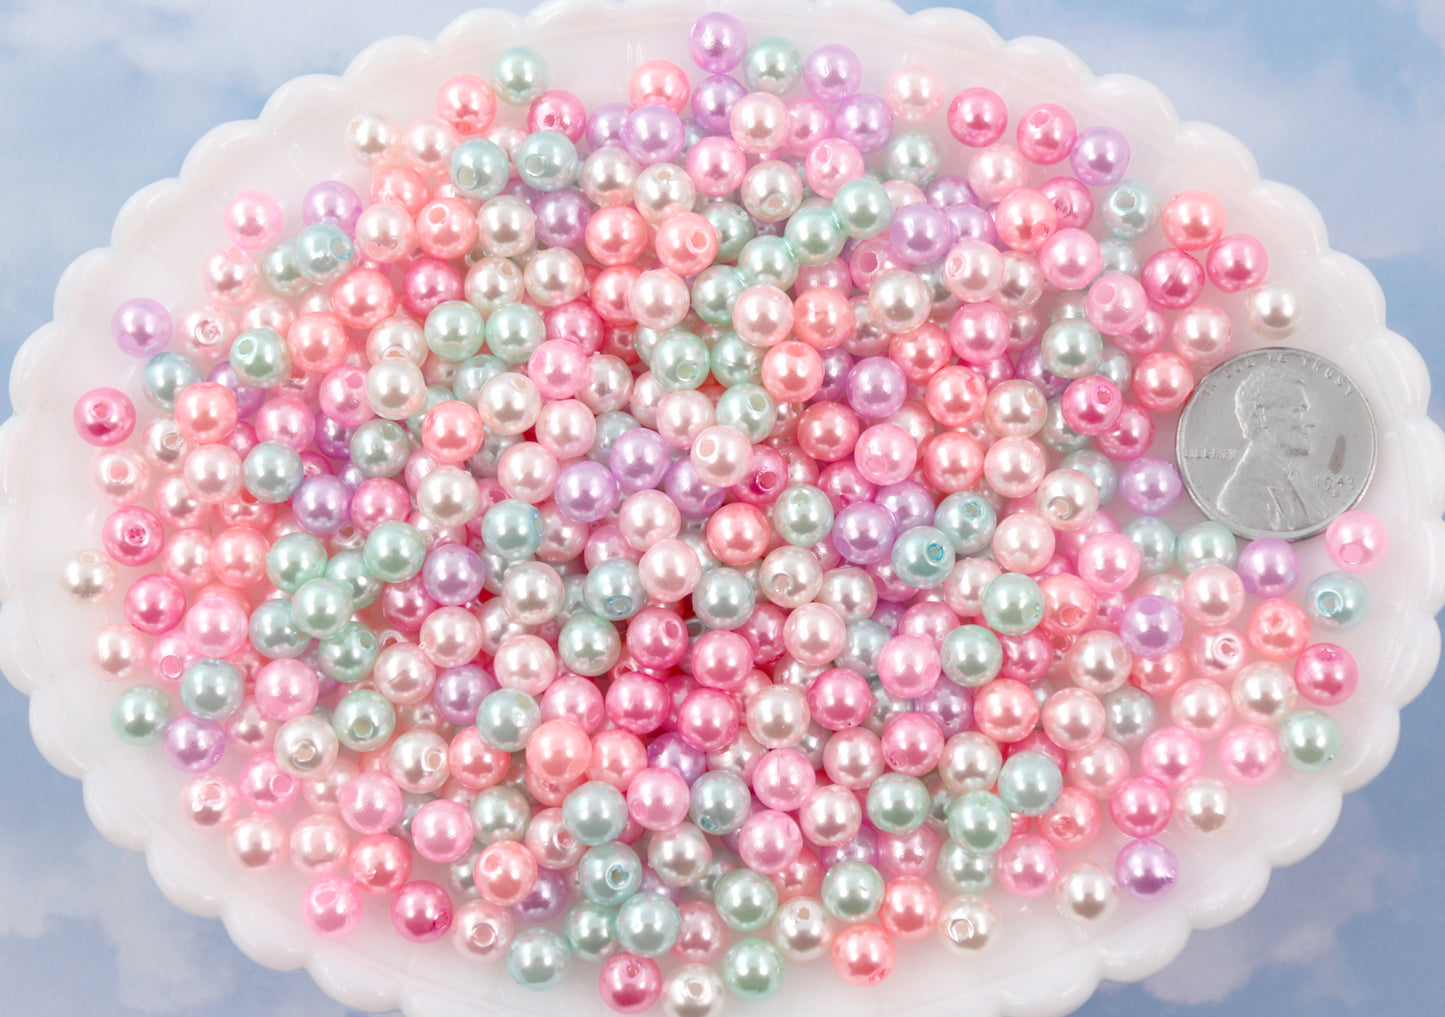 6mm Small Round Pastel Acrylic Pearl Plastic Beads - 500 pc set